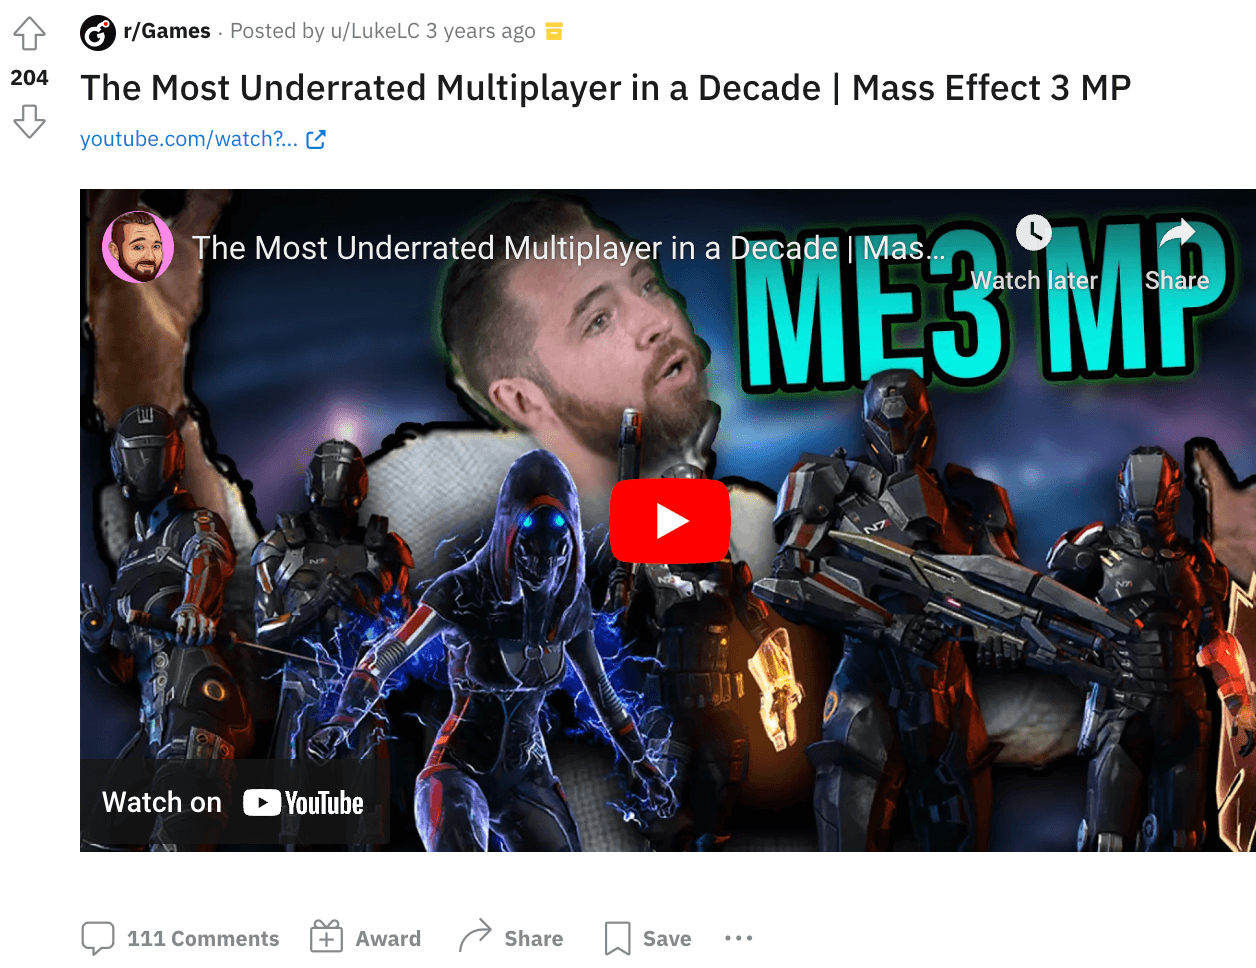 A Reddit post stating that Mass Effect 3's MP mode is underrated